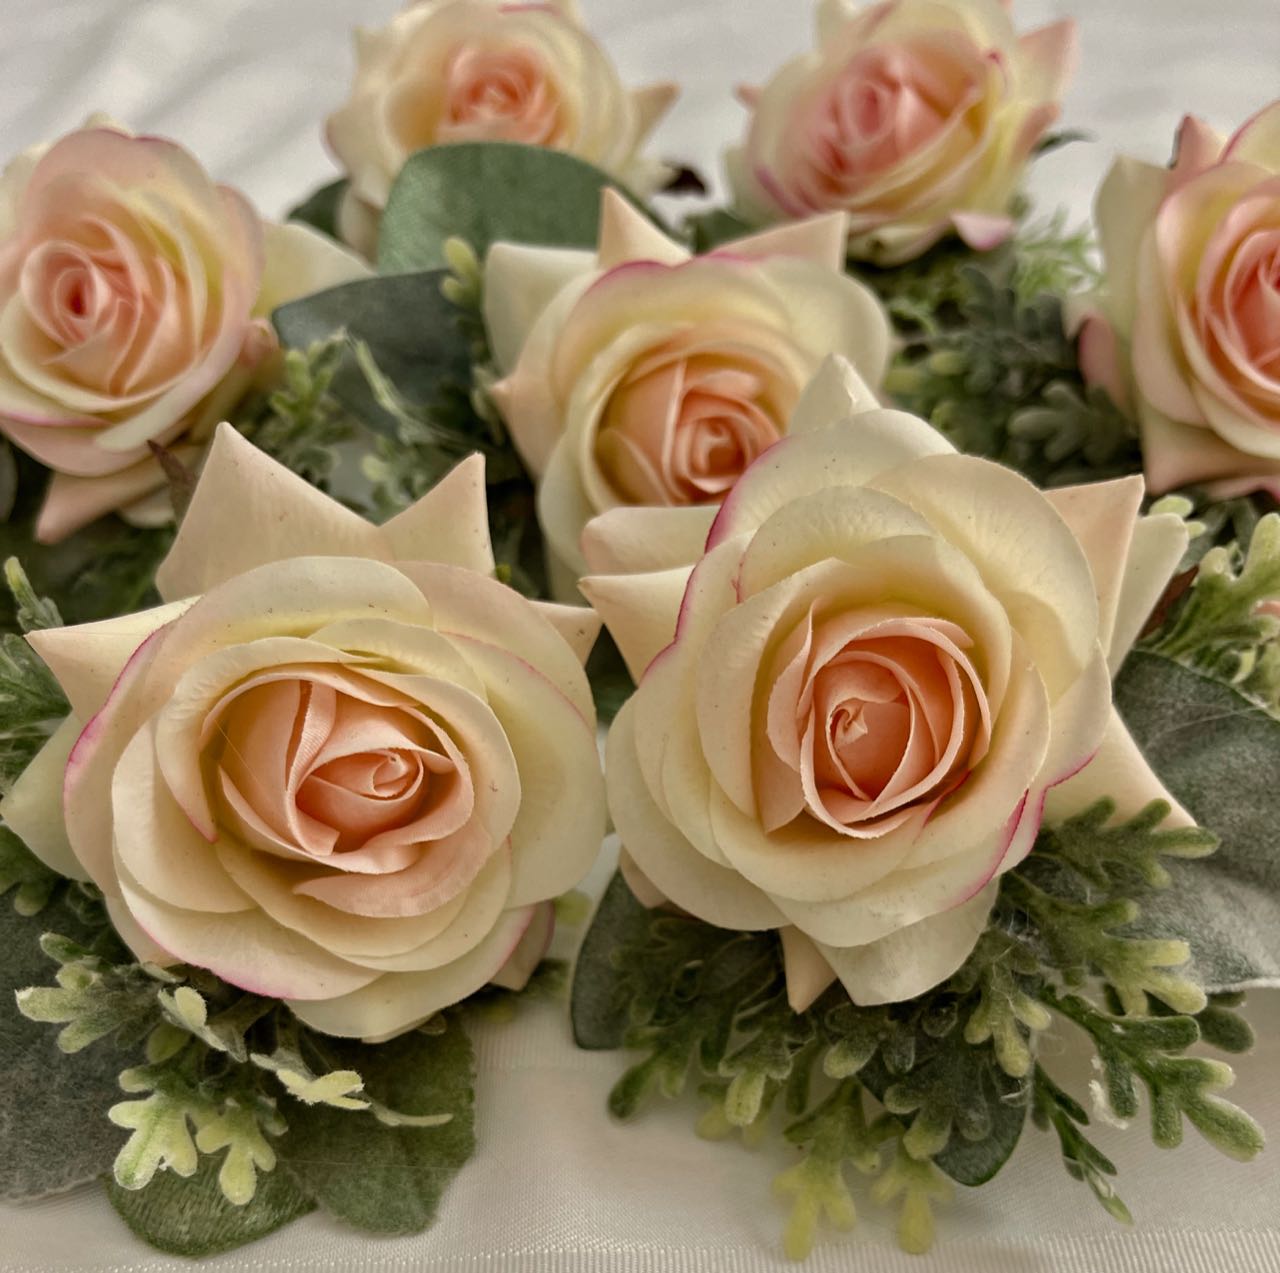 Boutonniere single Blush rose with Eucalyptus- rent  for five days for $8.00 